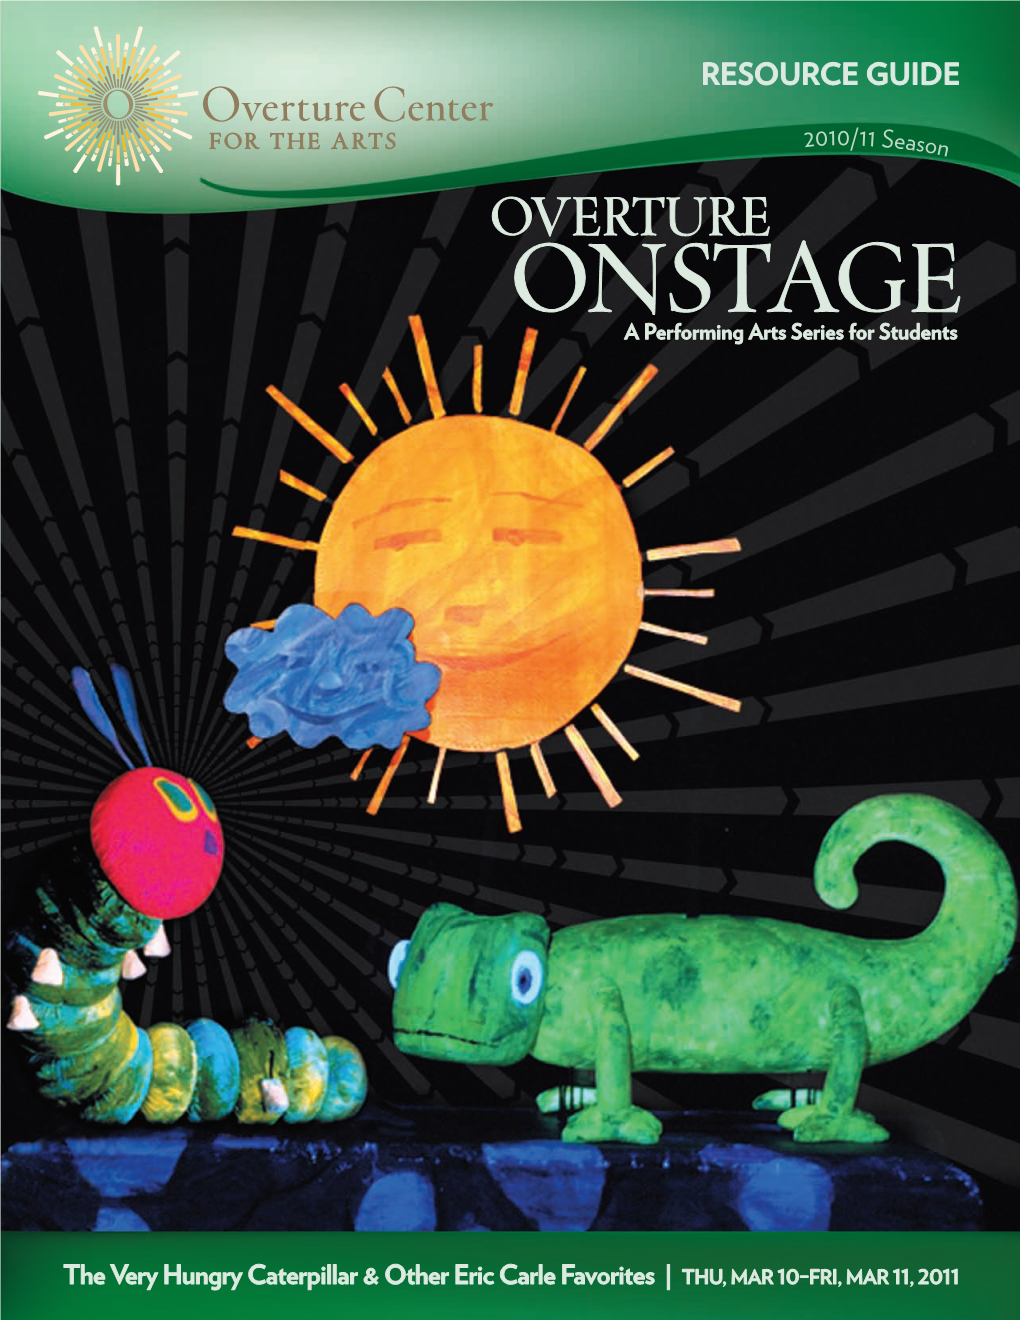 The Very Hungry Caterpillar & Other Eric Carle Favorites | THU, MAR 10–FRI, MAR 11, 2011